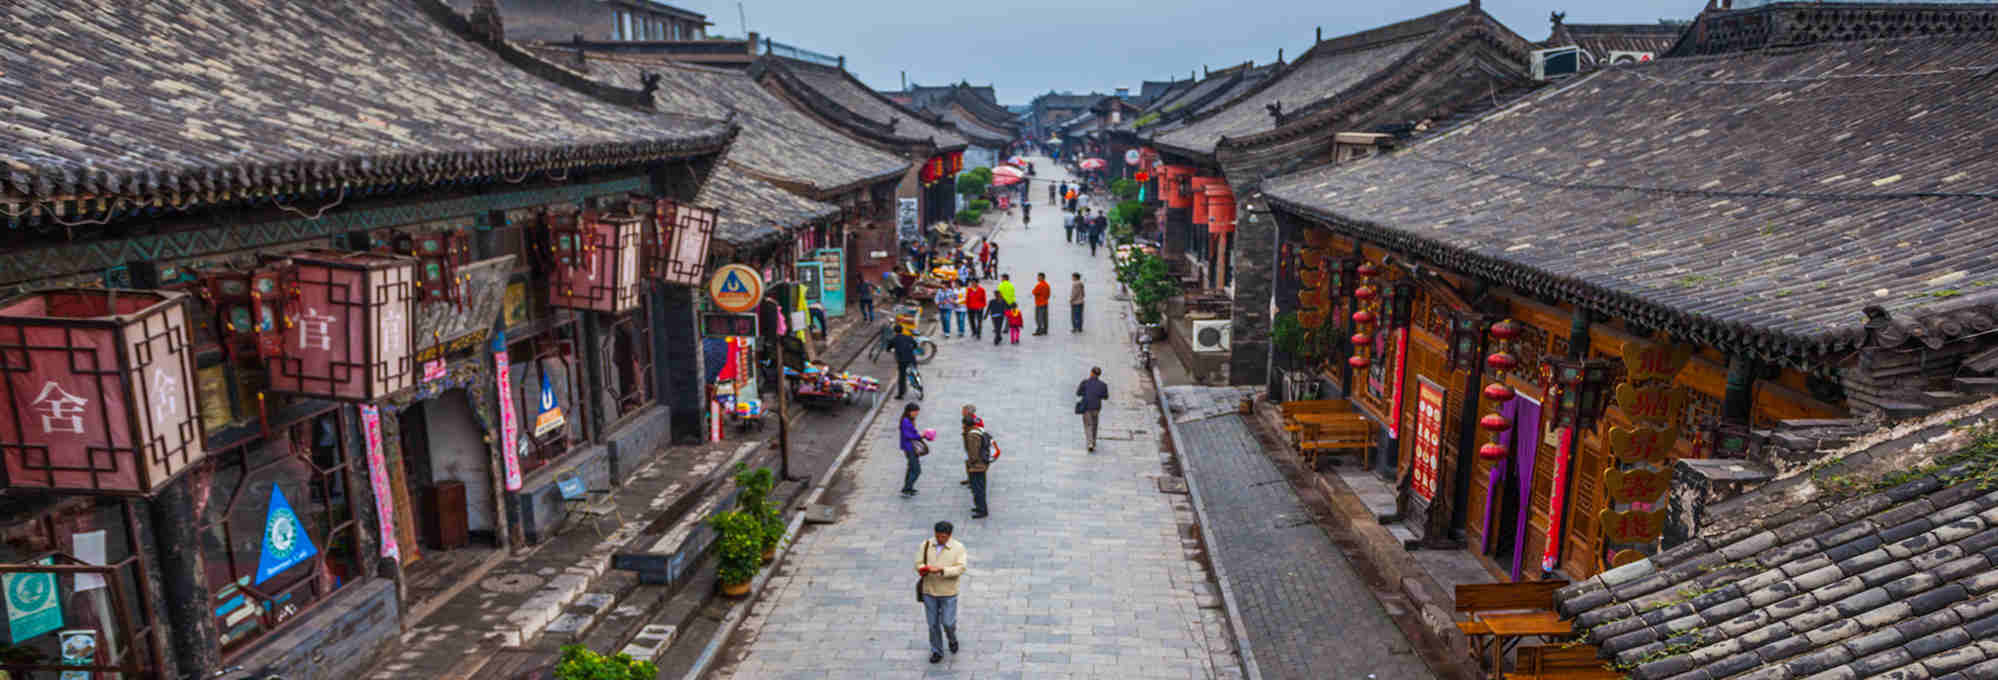 One-day Private Tour to Pingyao Ancient Town